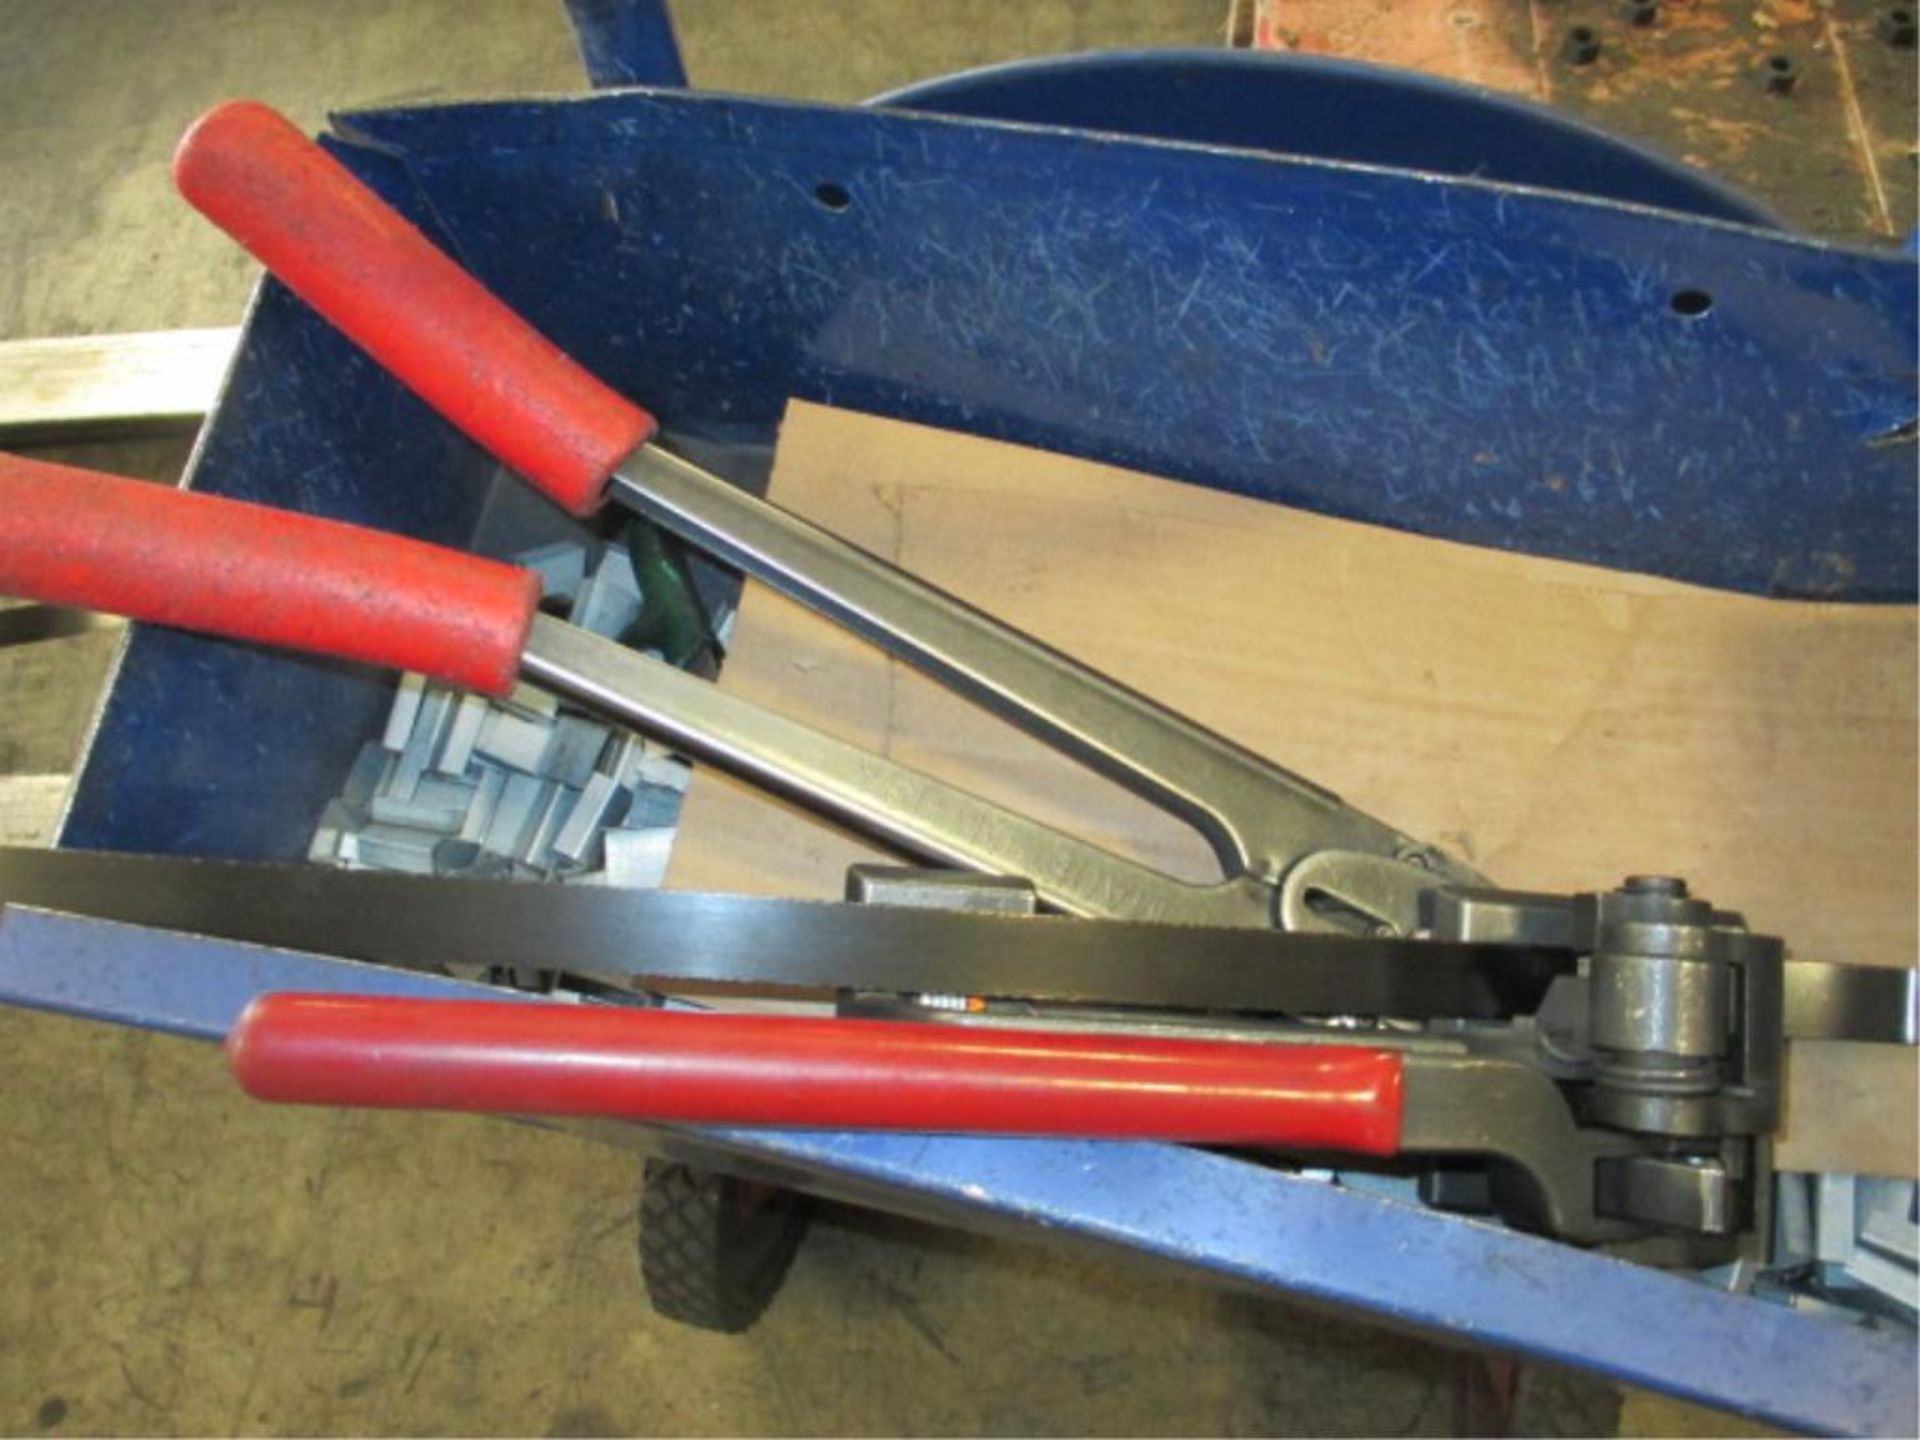 Uline Strapping Kit with Tensioner and Crimper. HIT# 2188110. Building 1. Asset(s) Located at 1578 - Image 2 of 2